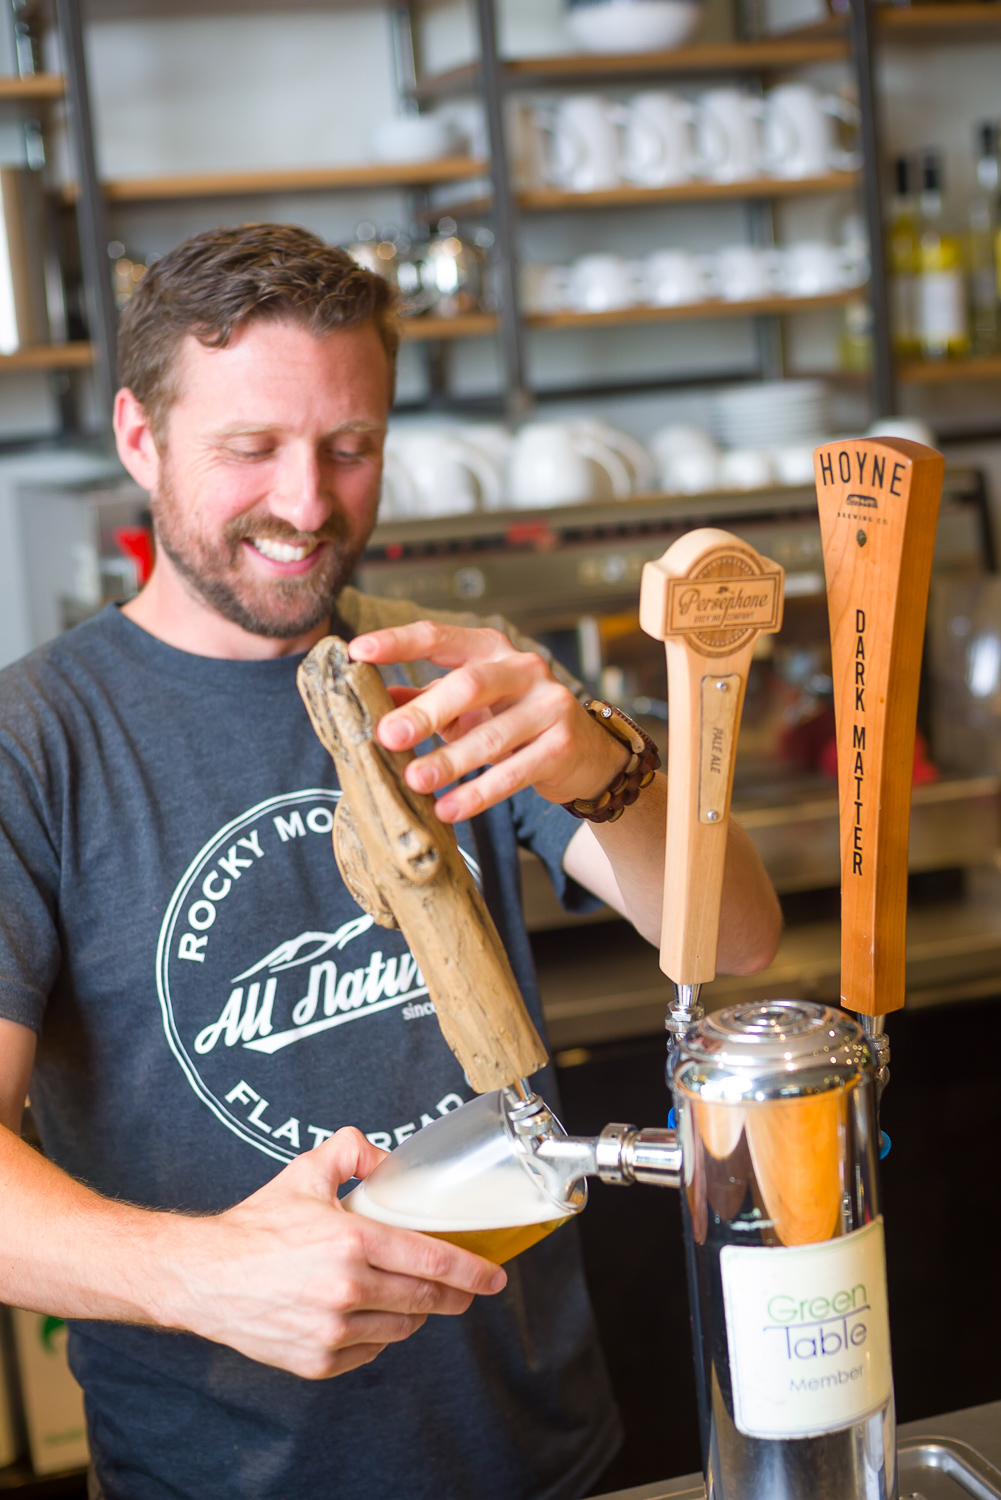 Smiling middle aged male bartender with beard pouring a beer from a tap lifestyle